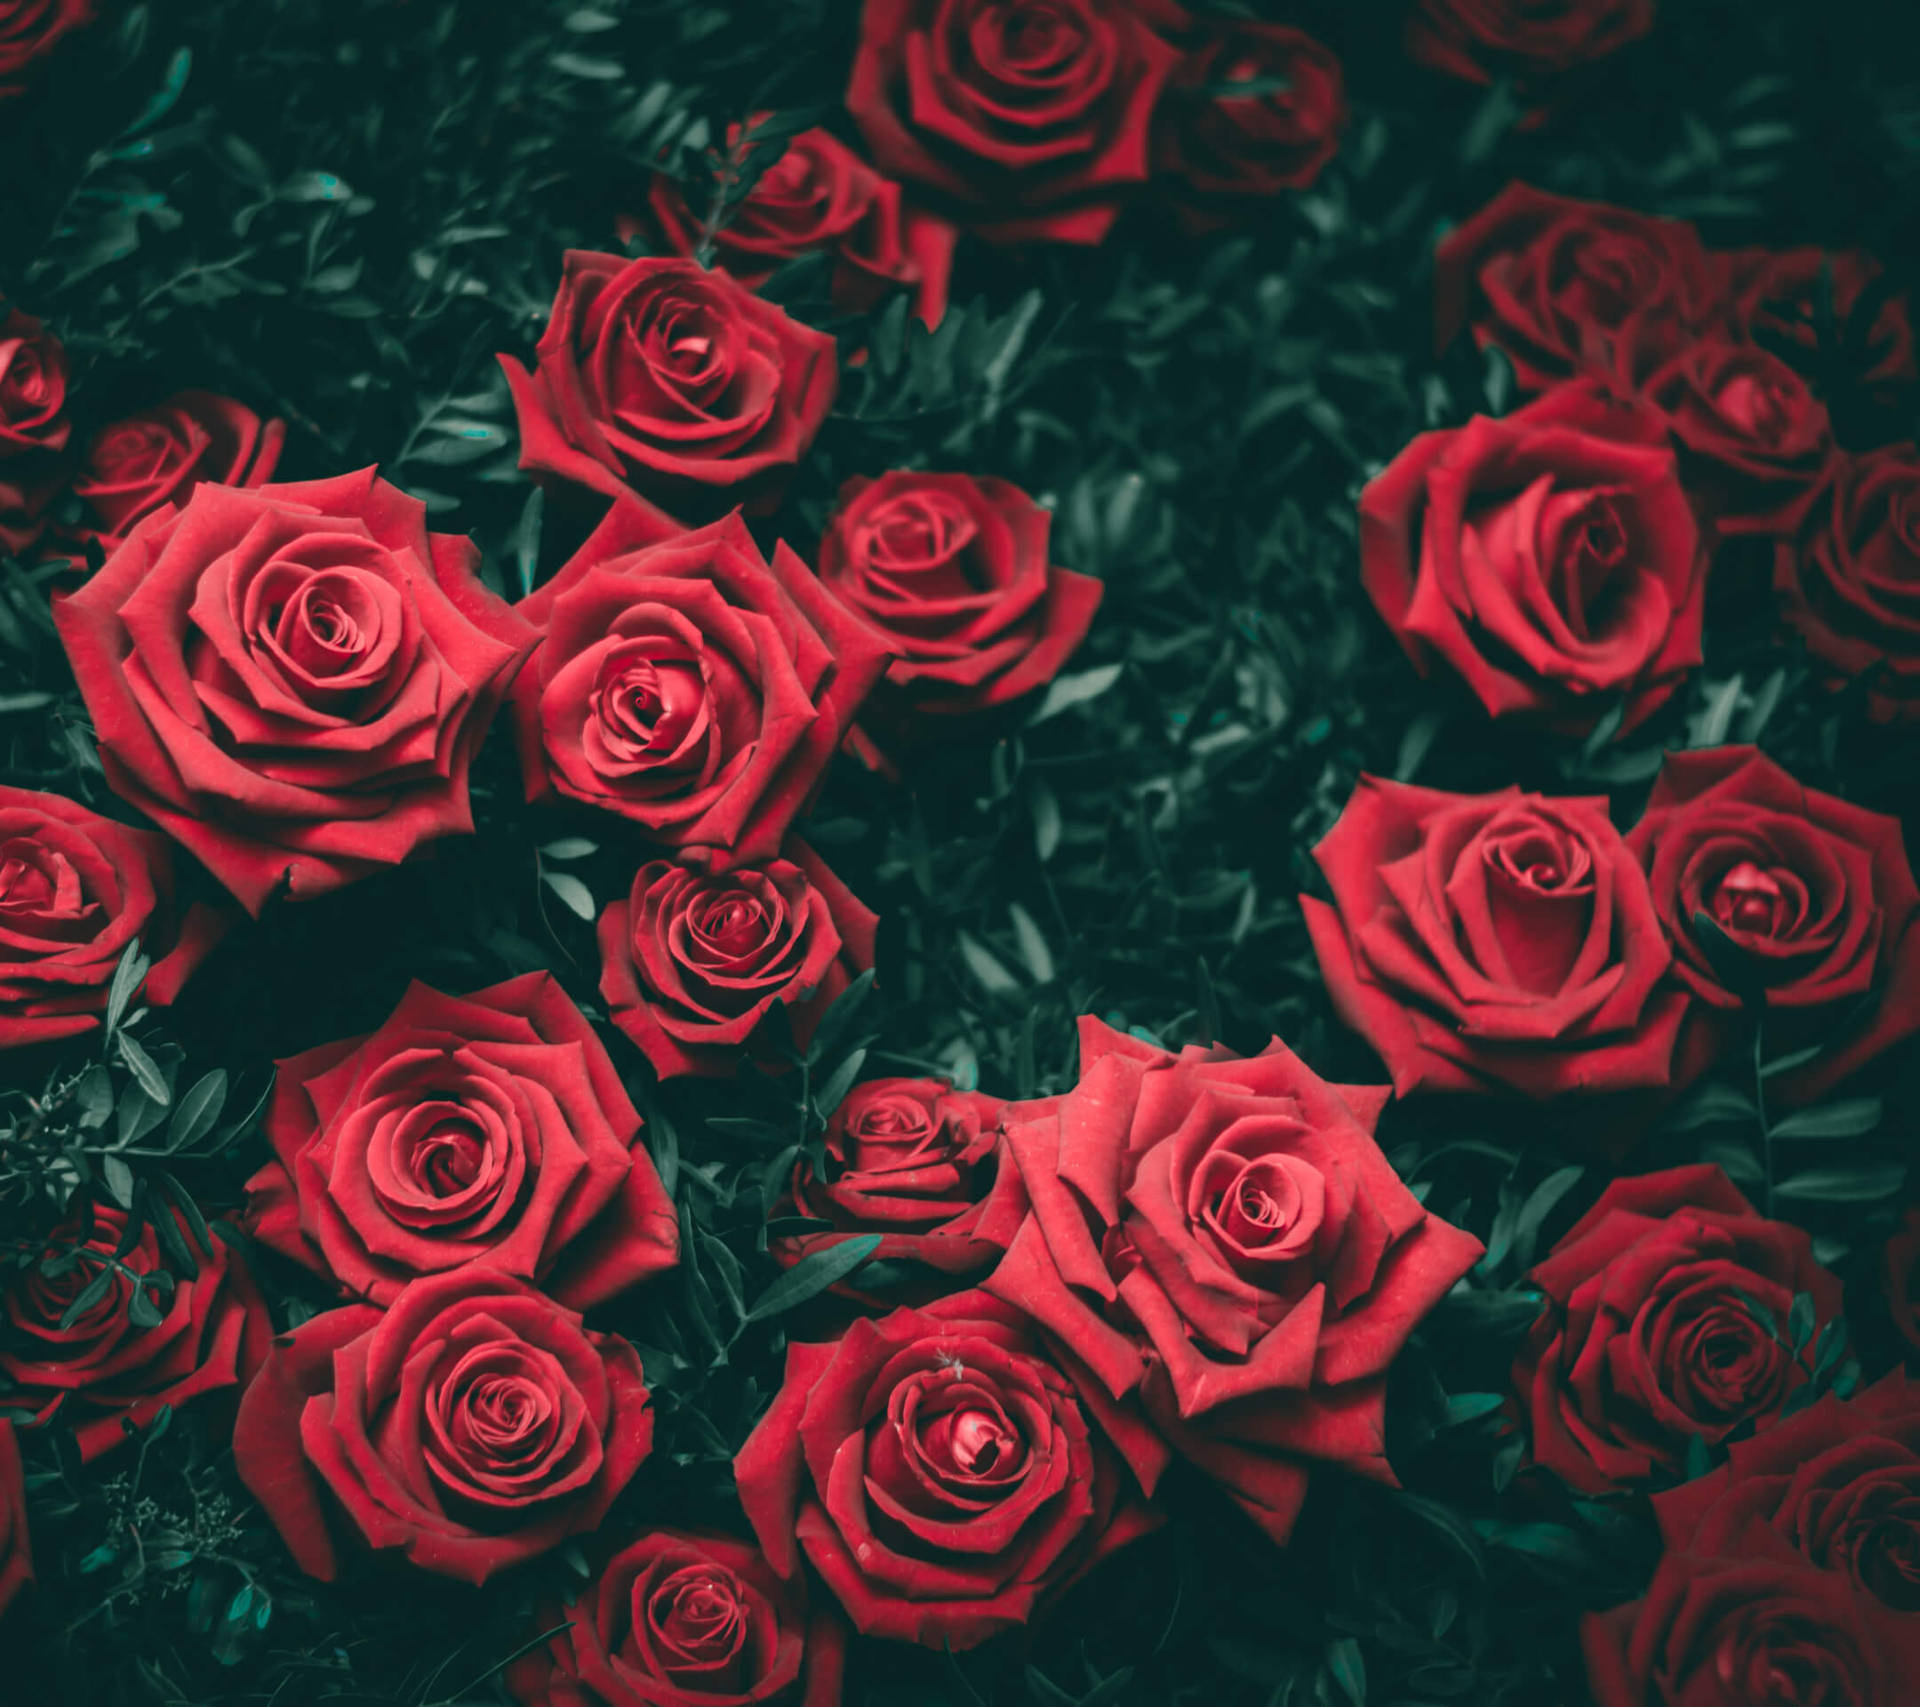 Bunch of Red Roses Image wallpaper.